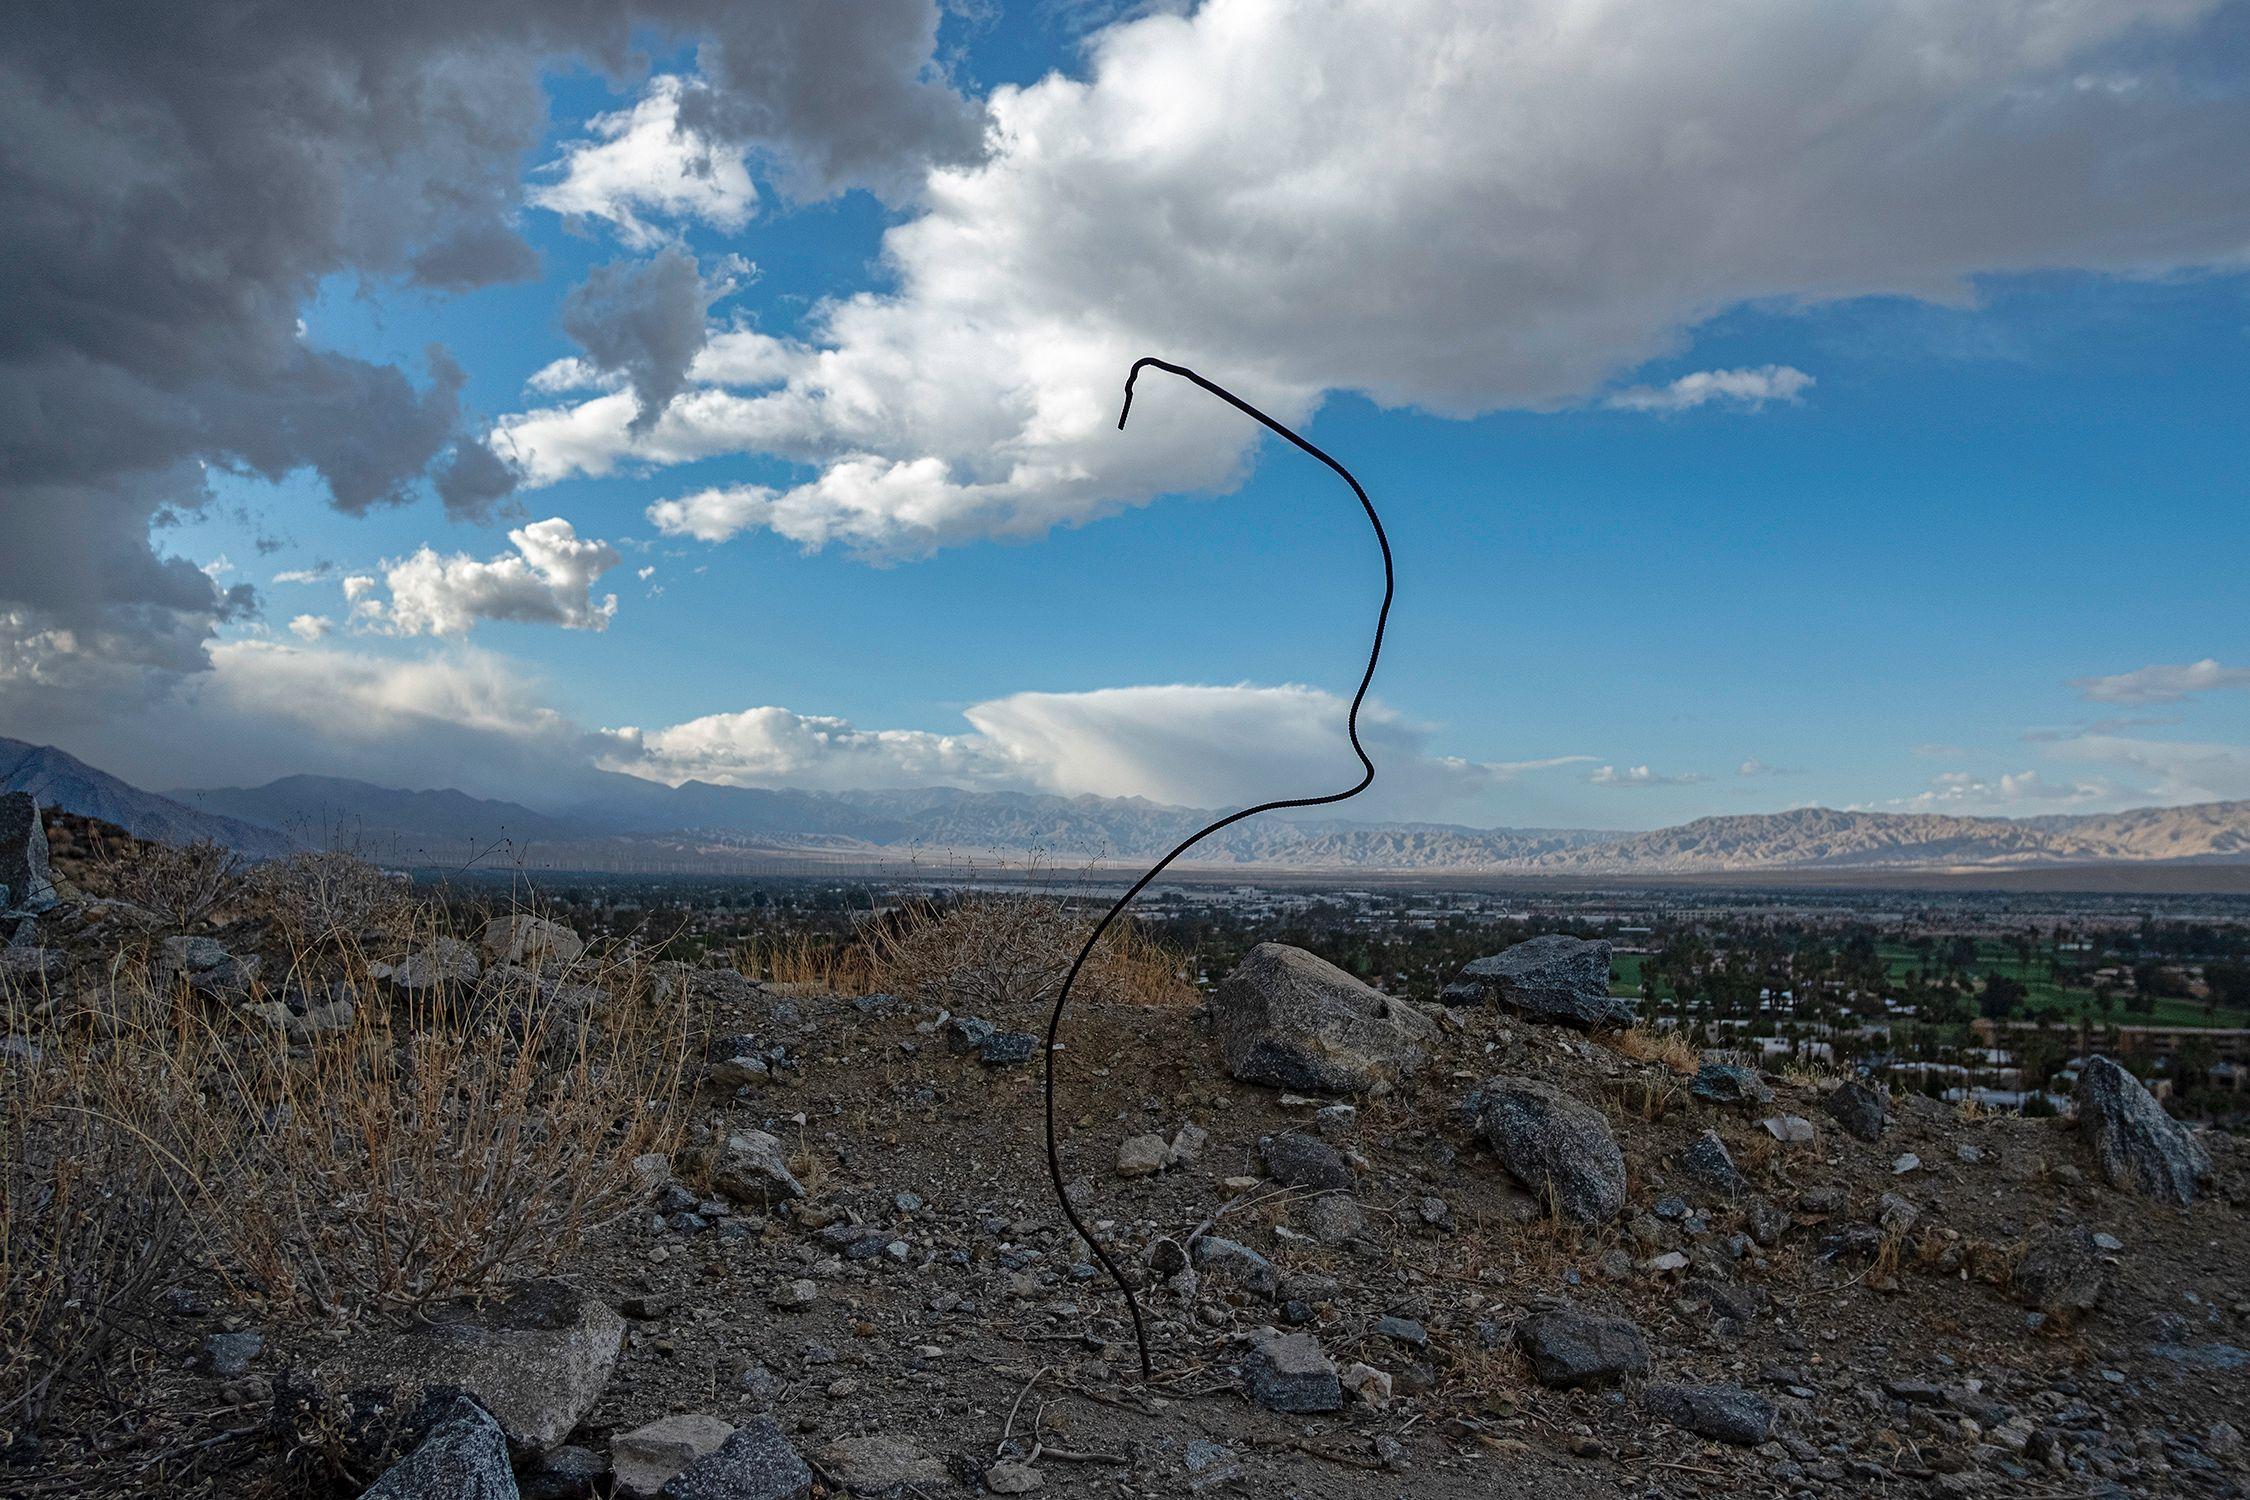 William Greiner, Rebar, Palm Springs CA, Color photograph, 30 x 45", 2020

The Space Between project is a collaboration between Fort Worth native abstract painter Matt Clark and nationally collected photographer William Greiner. With work focused on